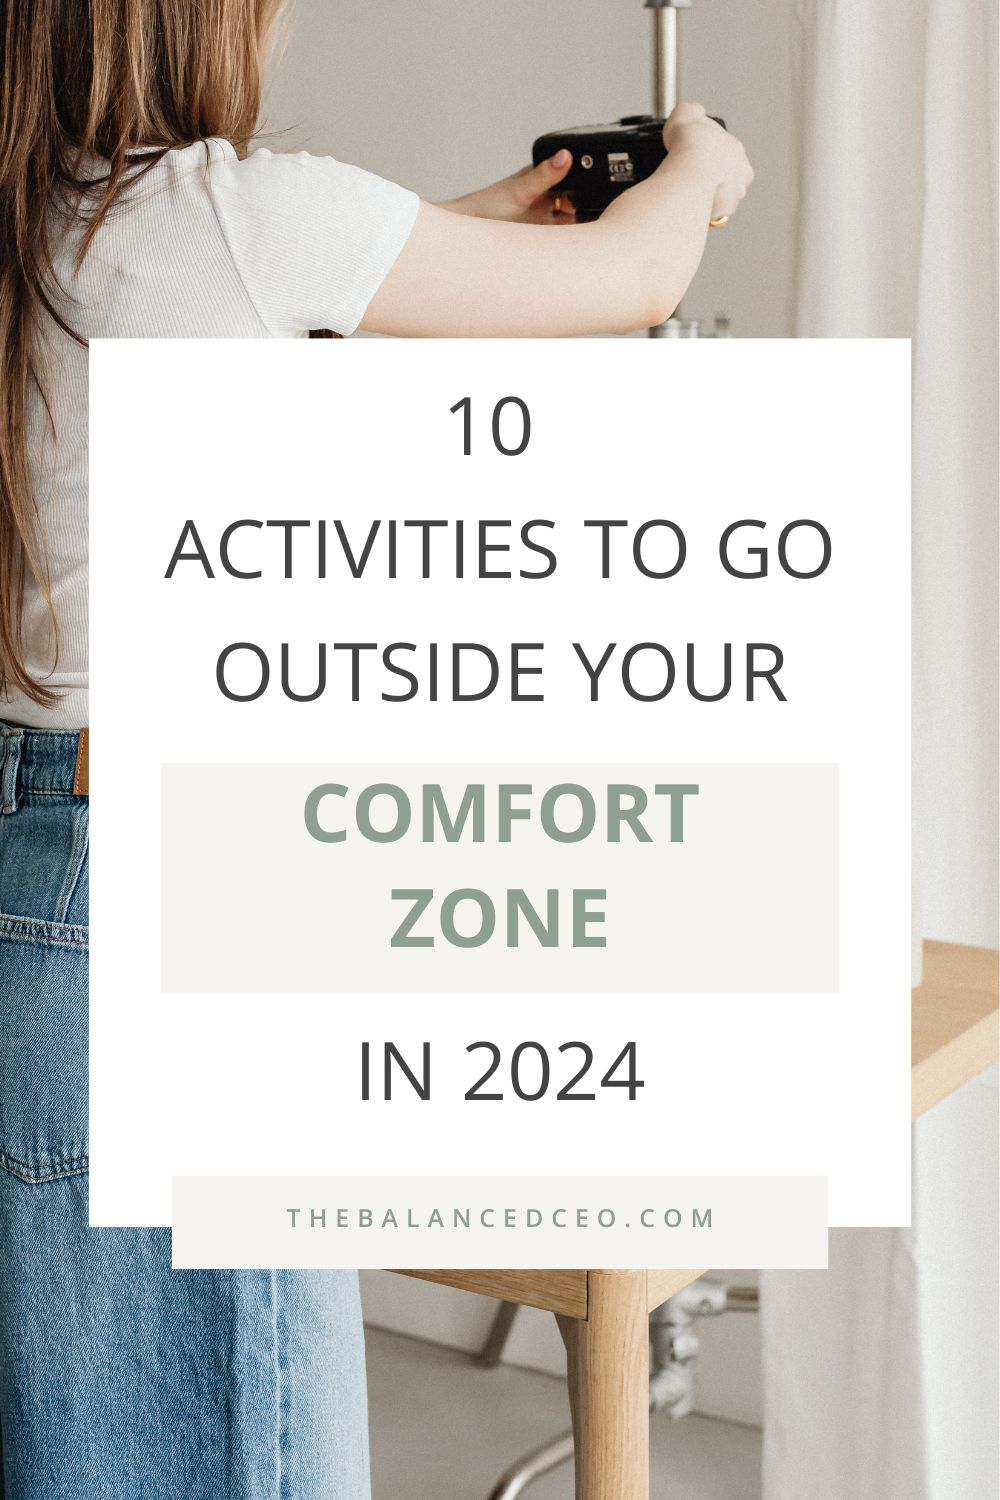 10 Activities to Go Outside Your Comfort Zone in 2024